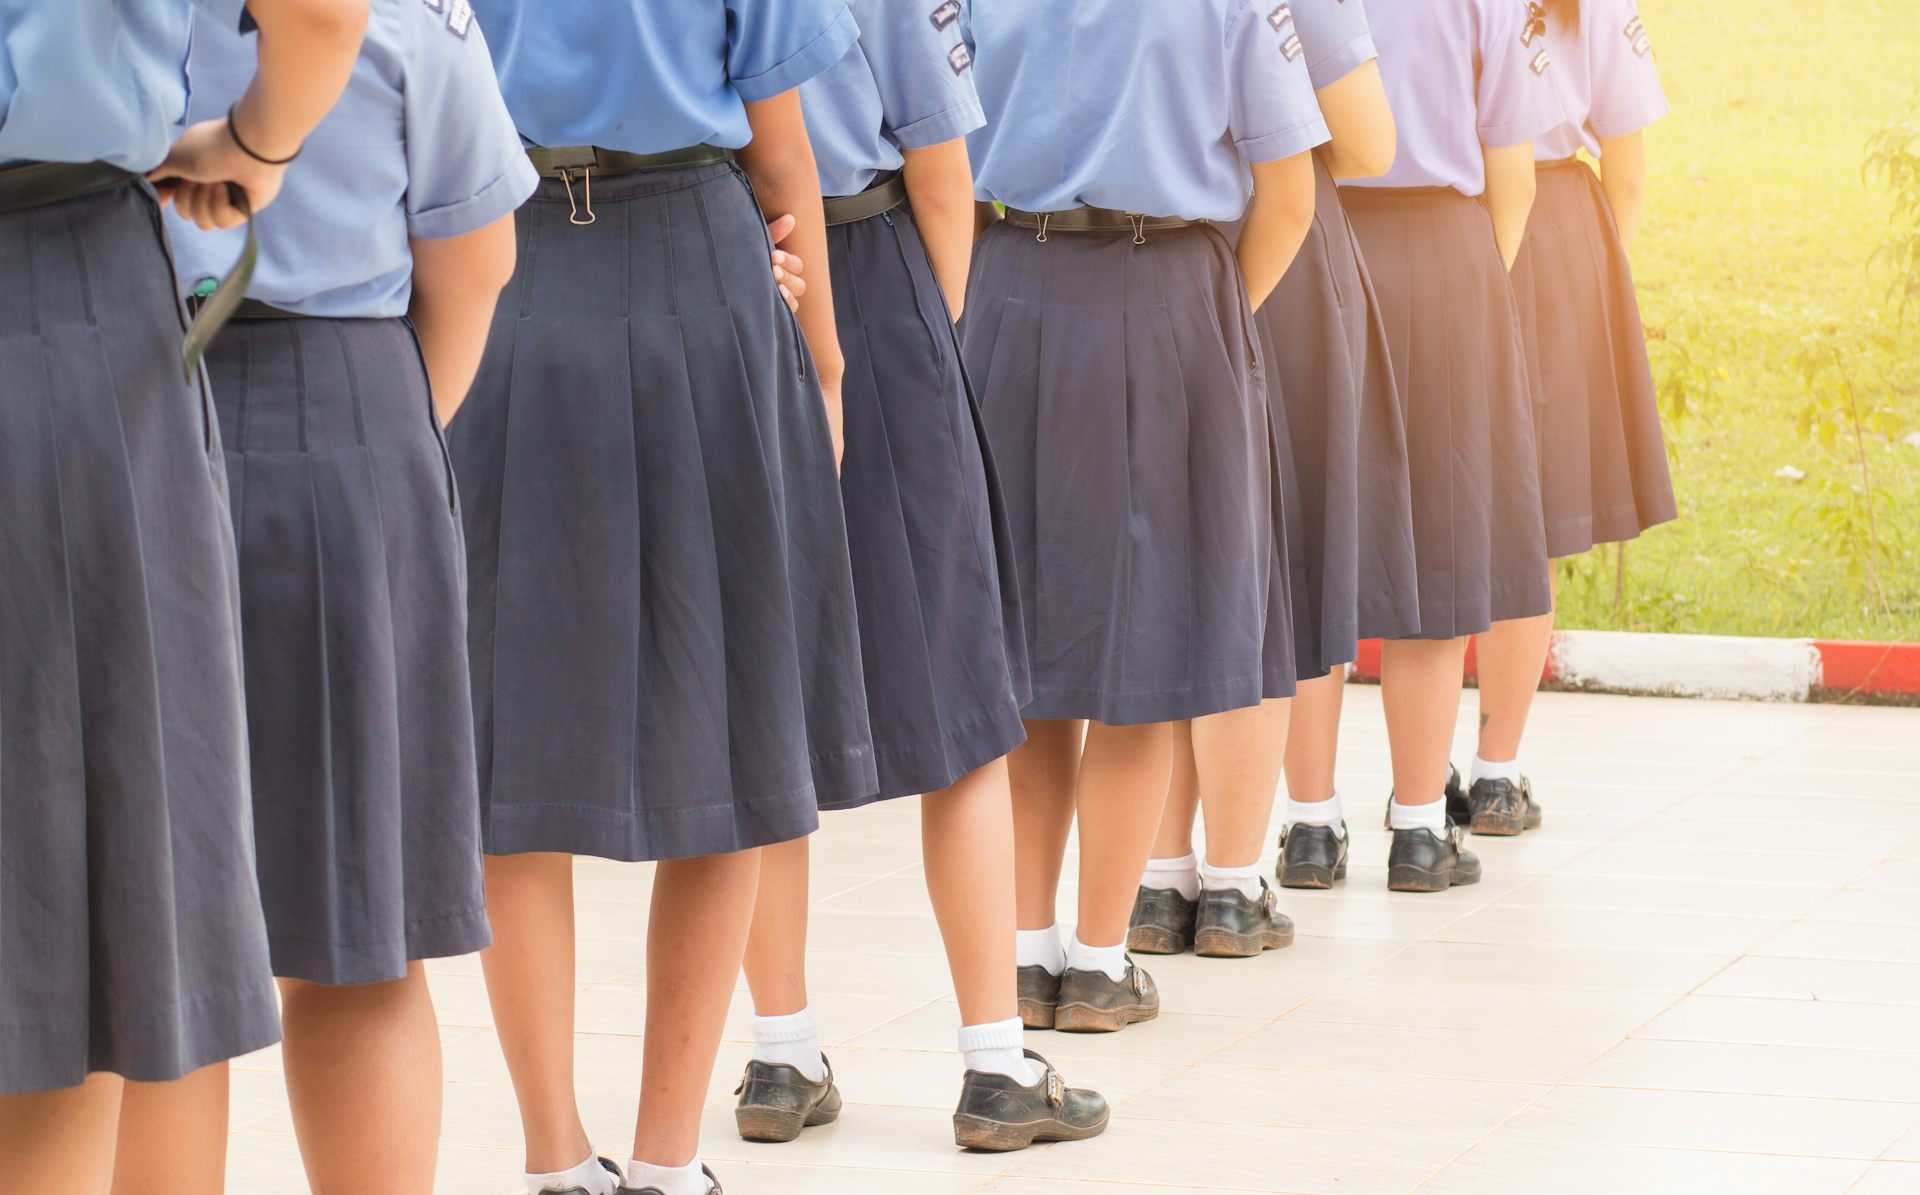 Why do we still make girls wear skirts and dresses as school uniform? image